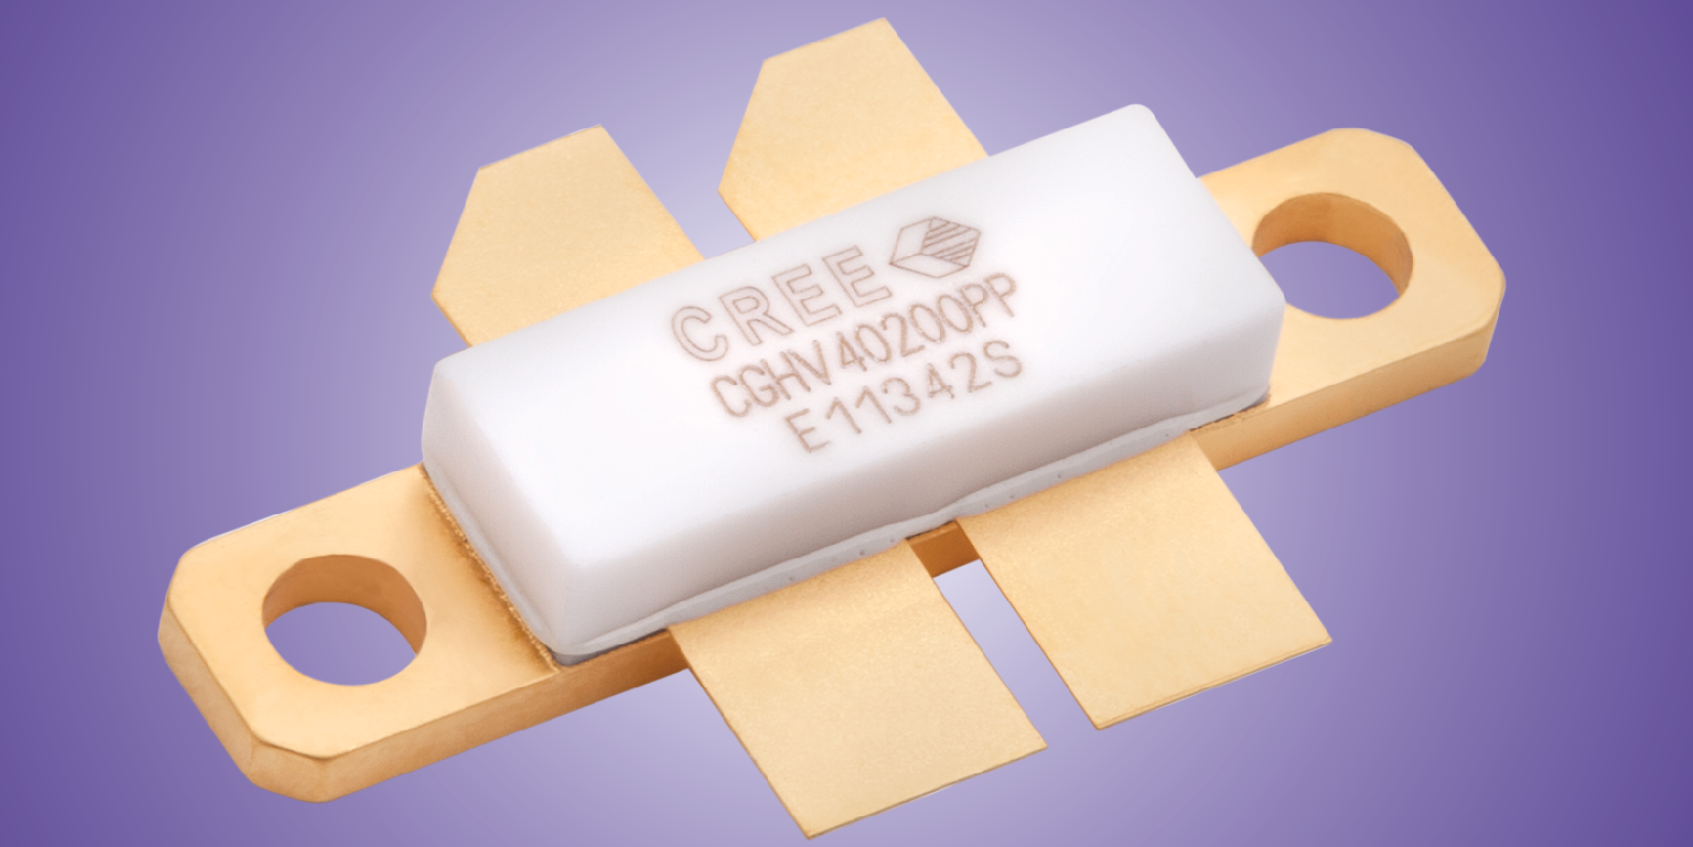 250W Power Device Covers the Frequency Range up to 3.0GHz